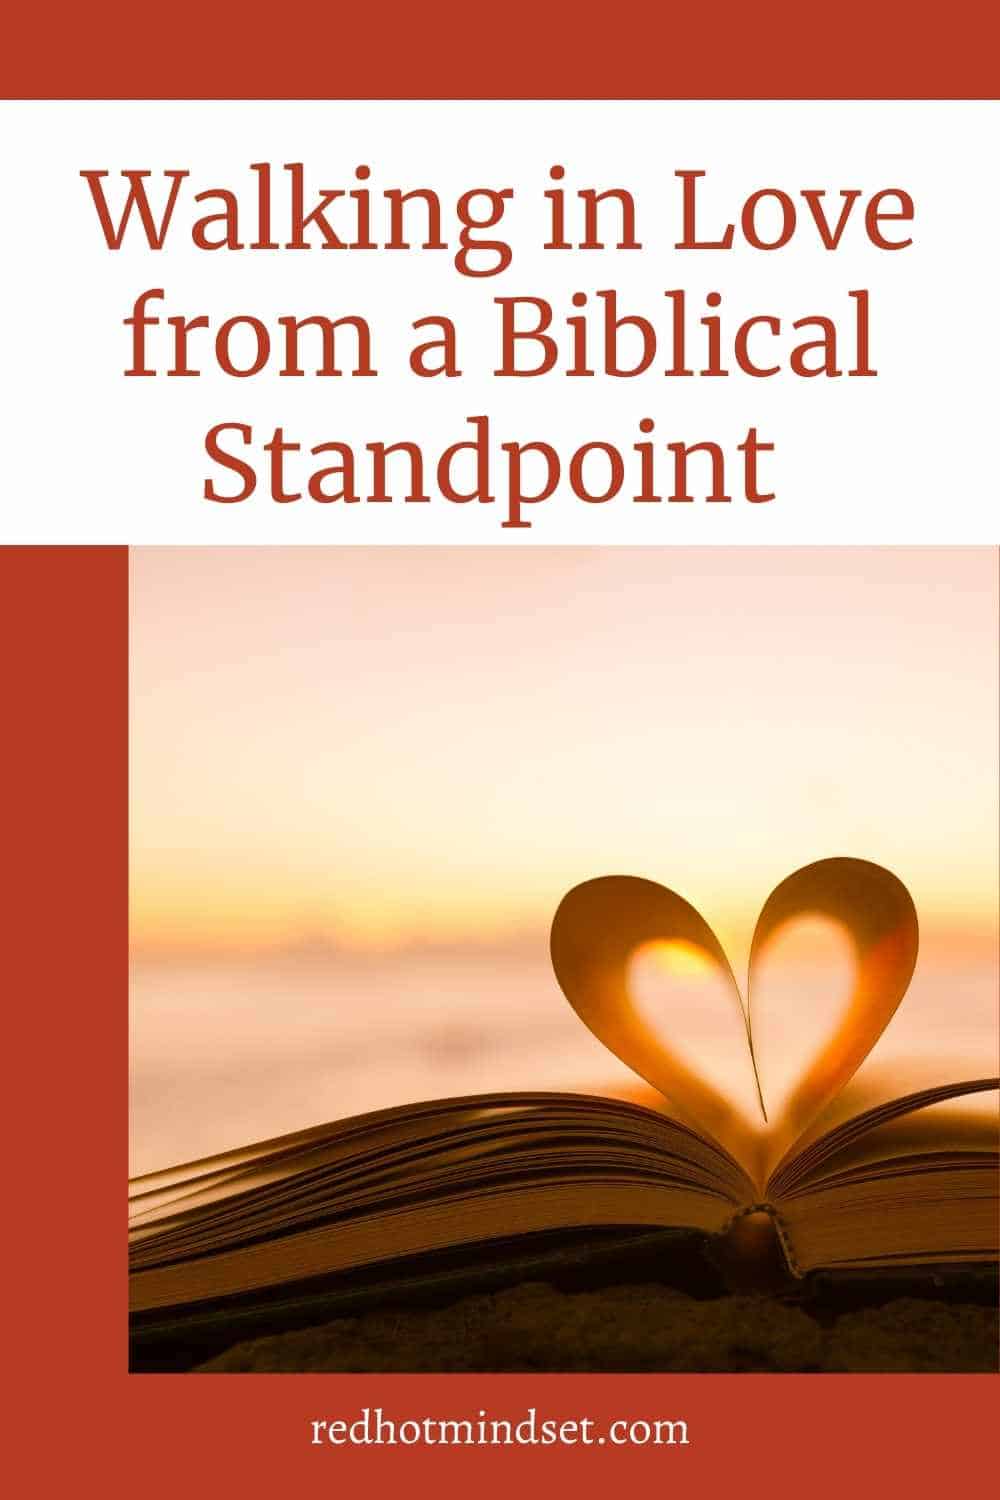 What Does Walking in Love and Justice Mean from a Biblical Standpoint?